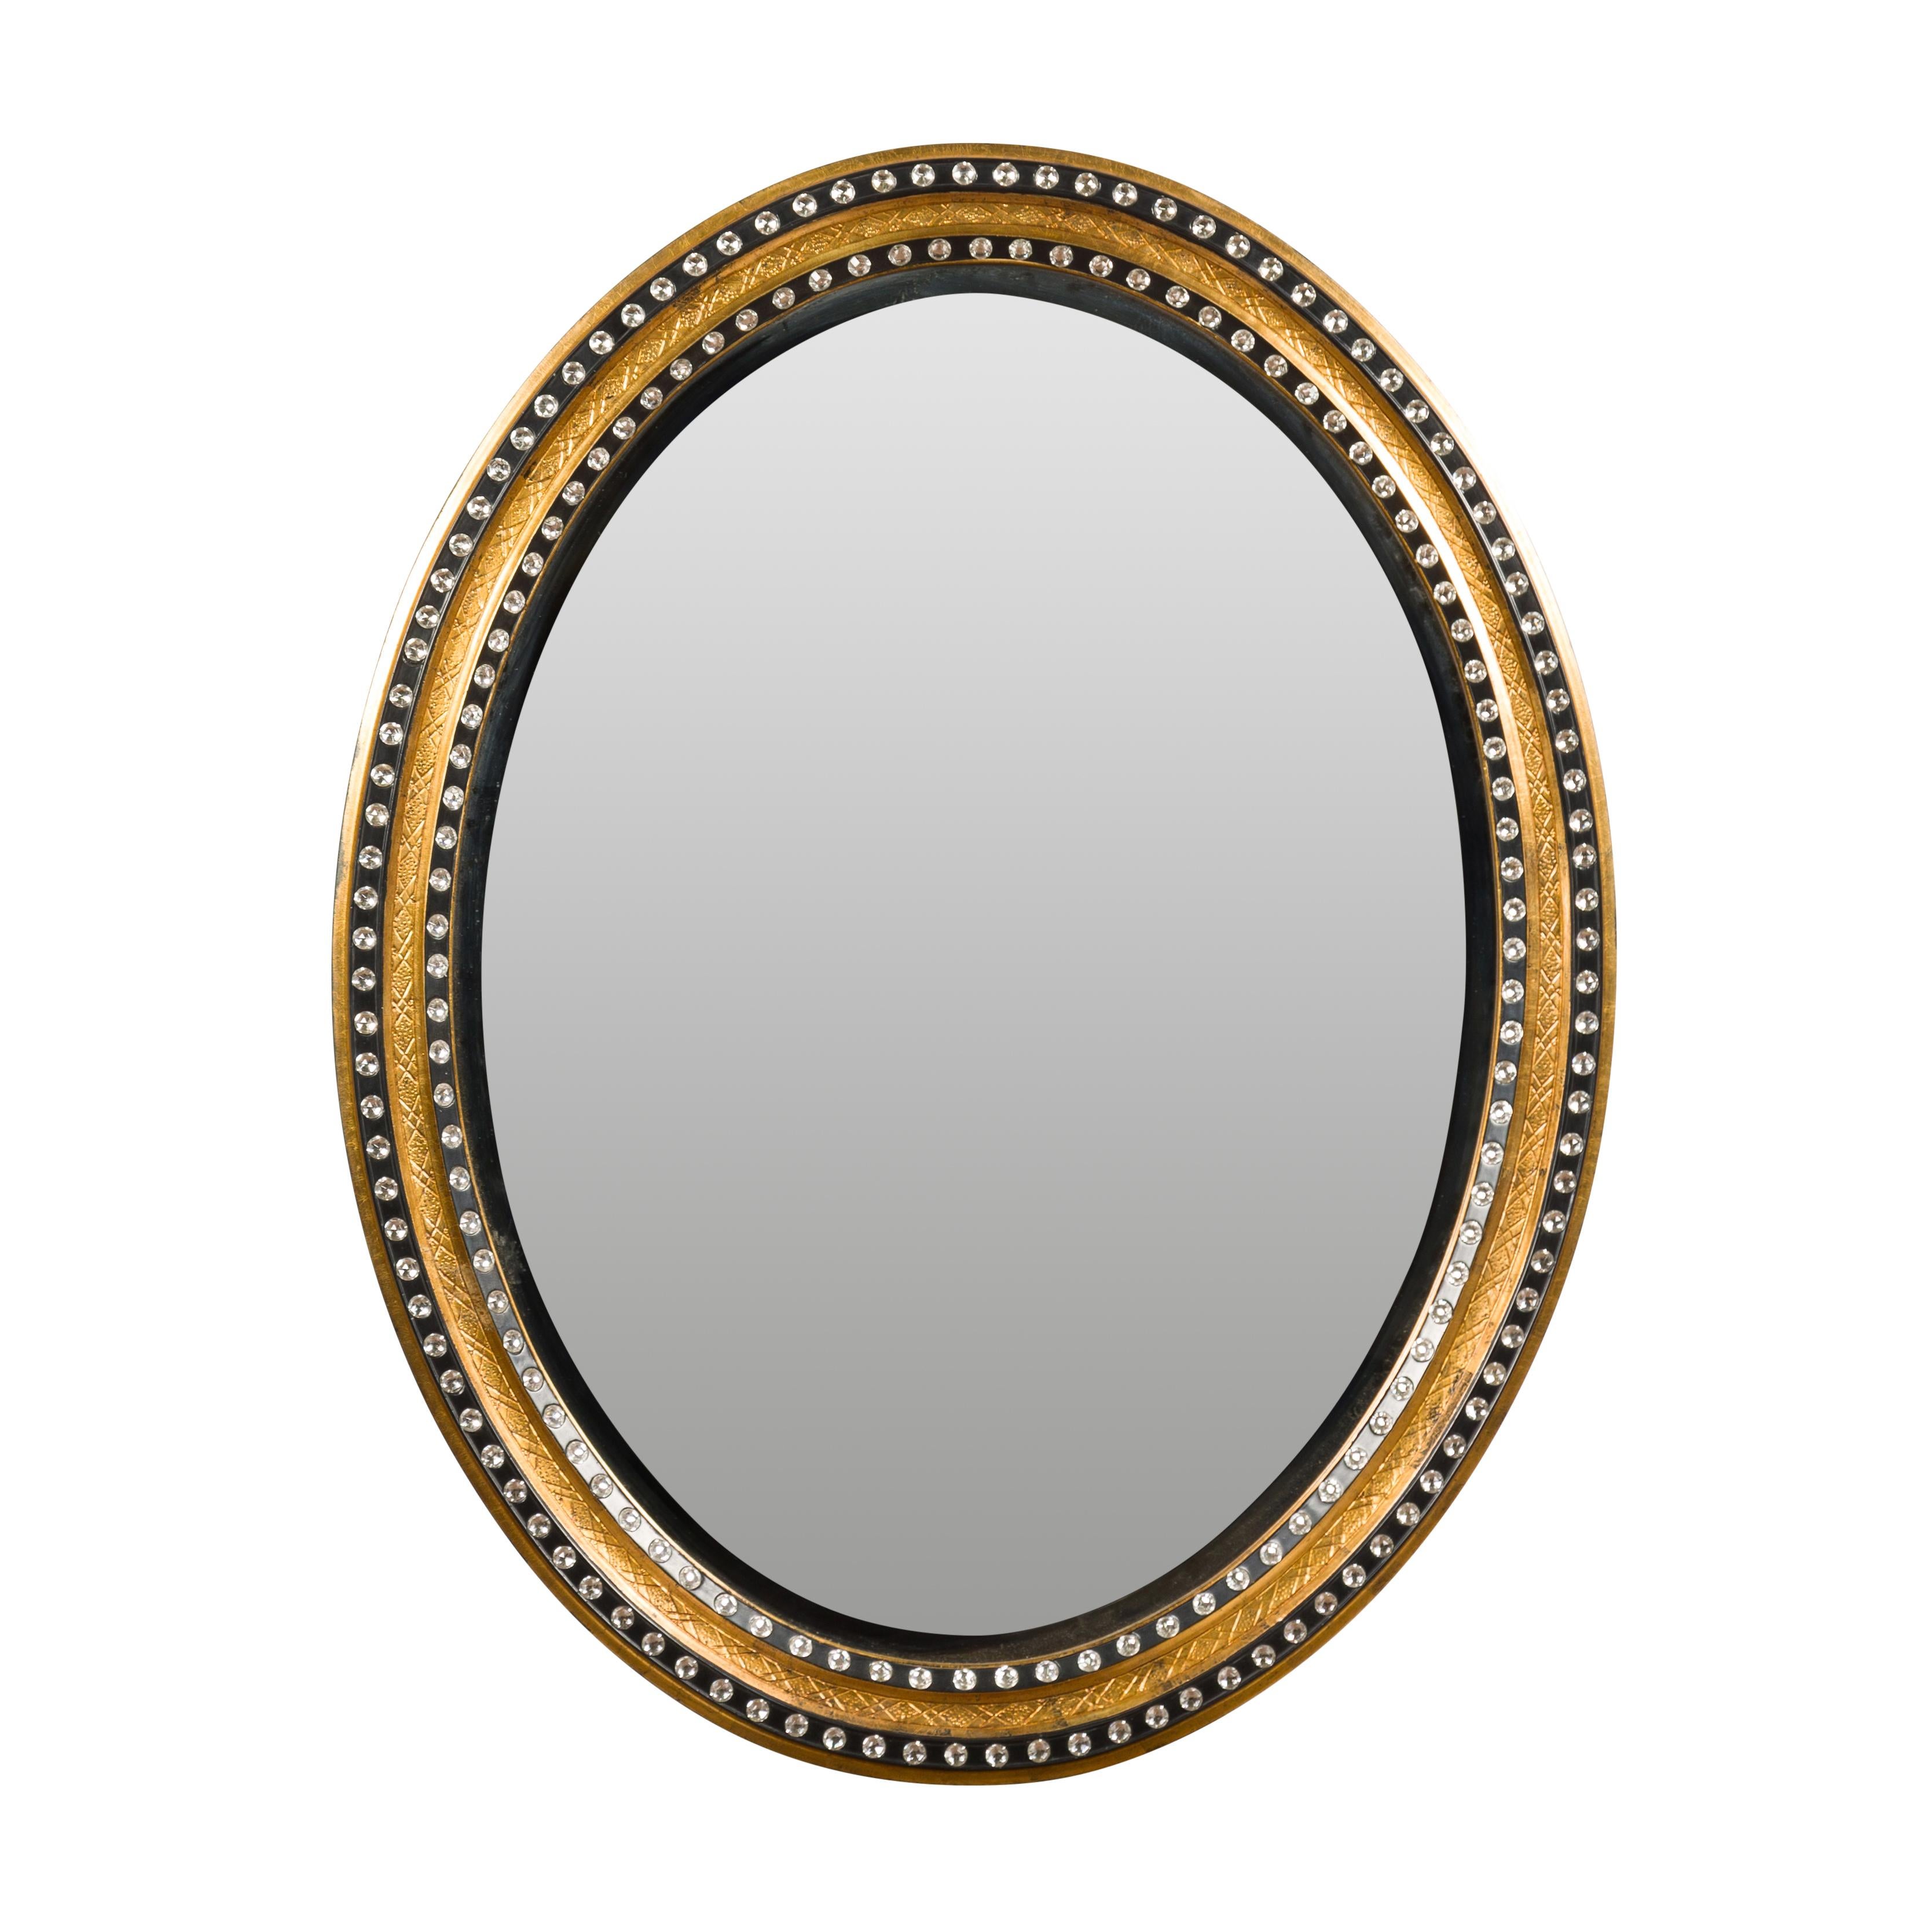 Midcentury Irish Oval Gold and Black Mirror with Diamanté Décor For Sale 11